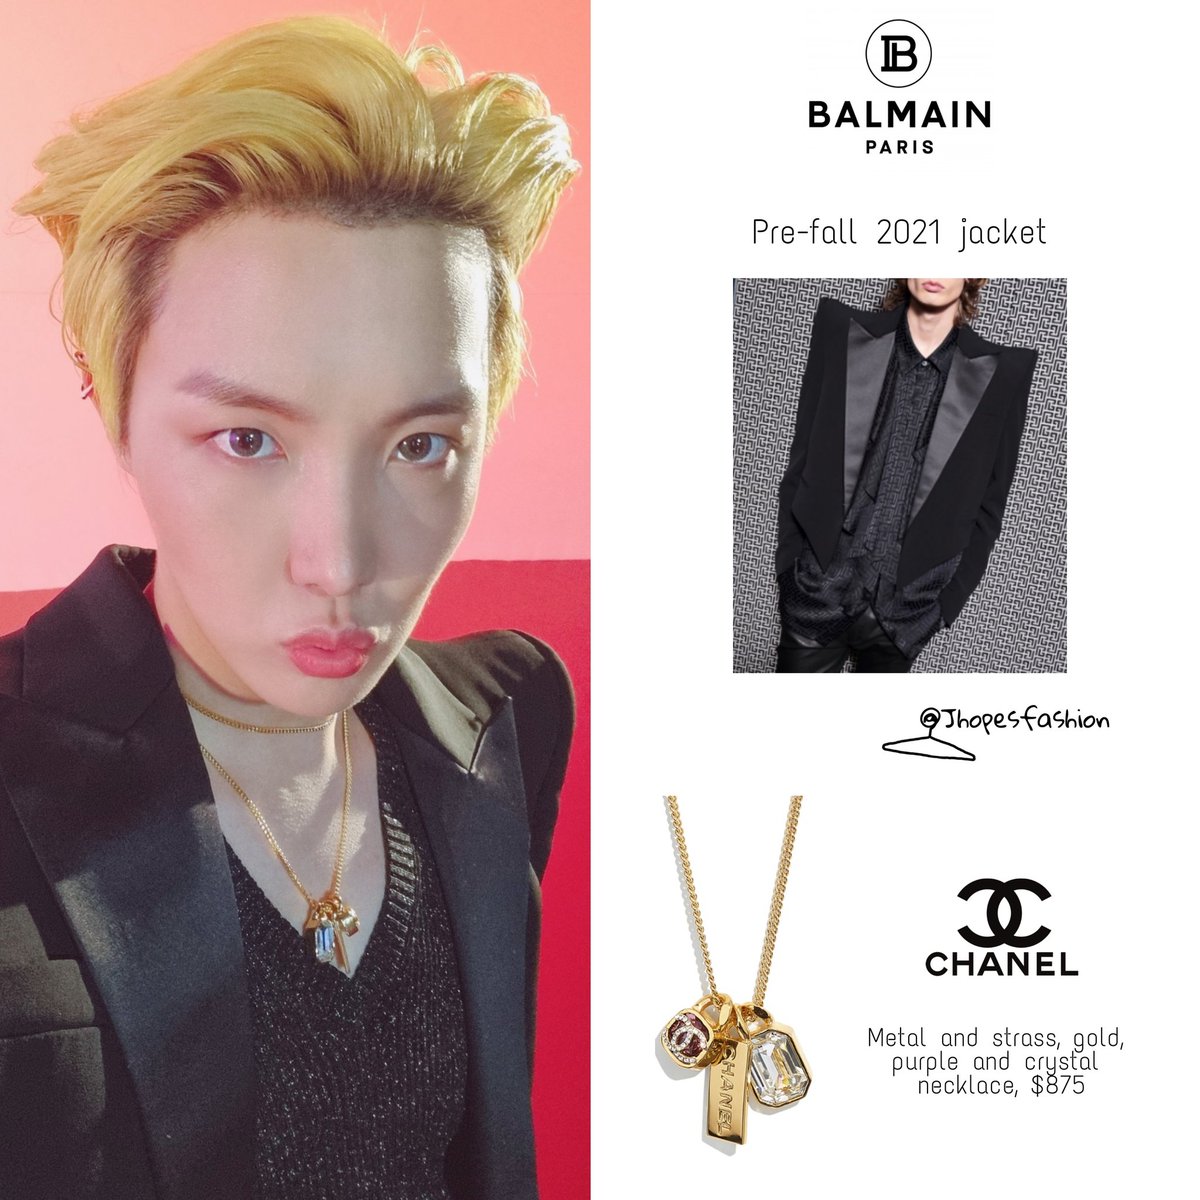 j-hope's closet (rest) on X: He is wearing his Chanel padlock necklace too   / X